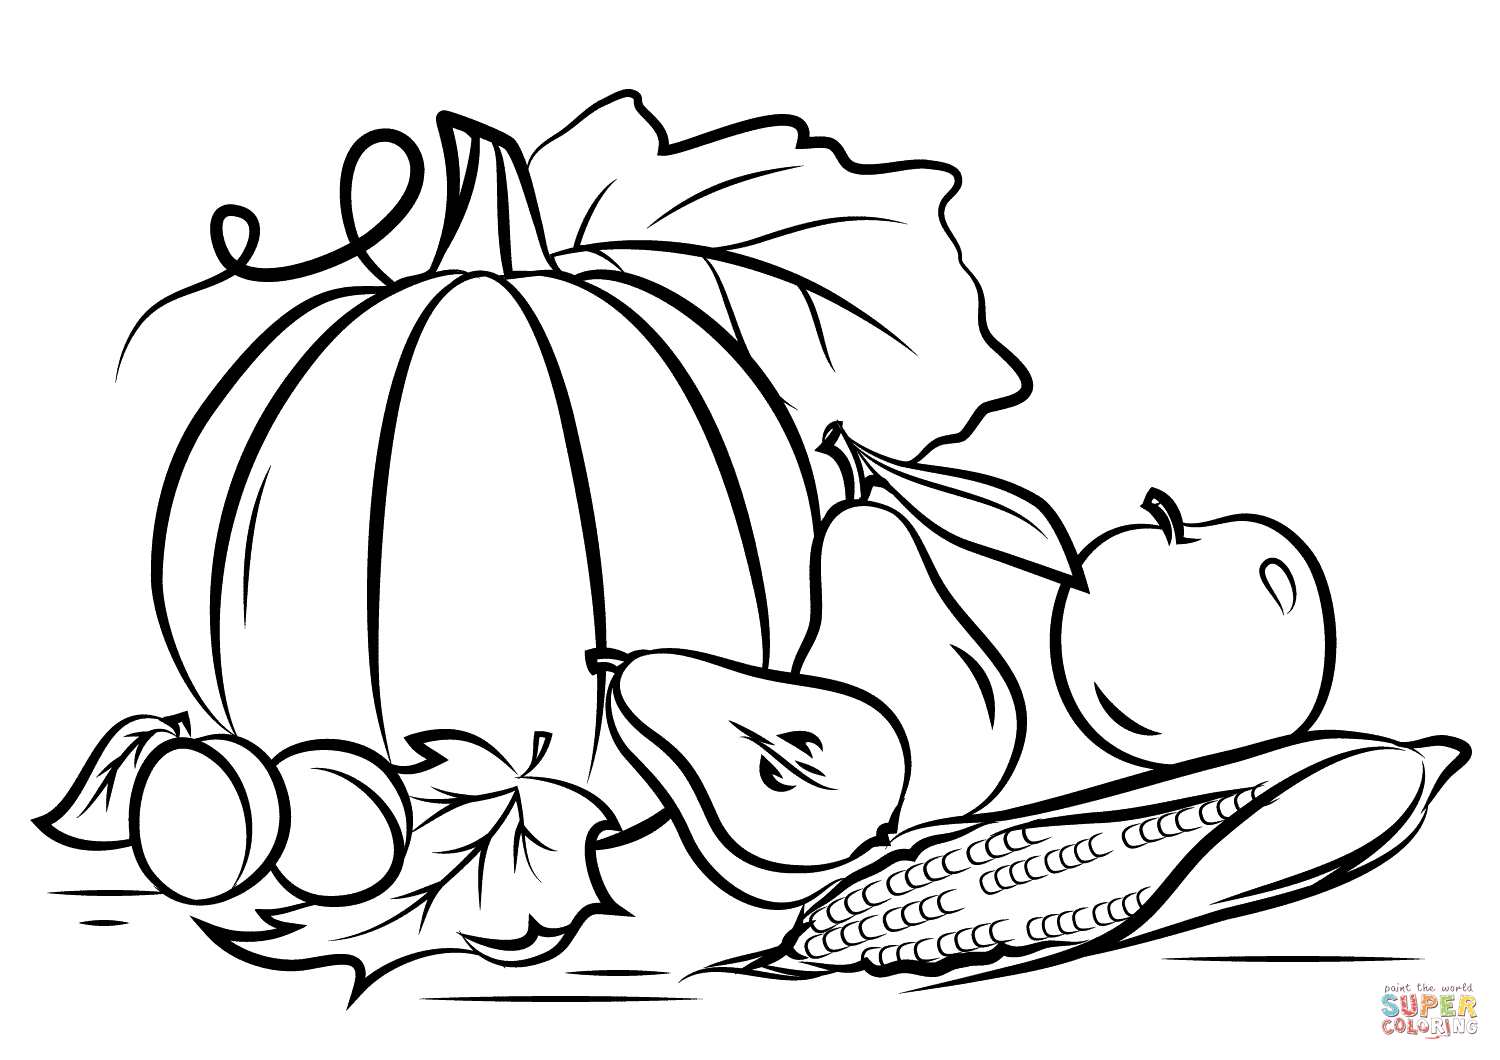 Autumn Harvest Coloring Page | Free Printable Coloring Pages - Free Printable Leaf Coloring Pages